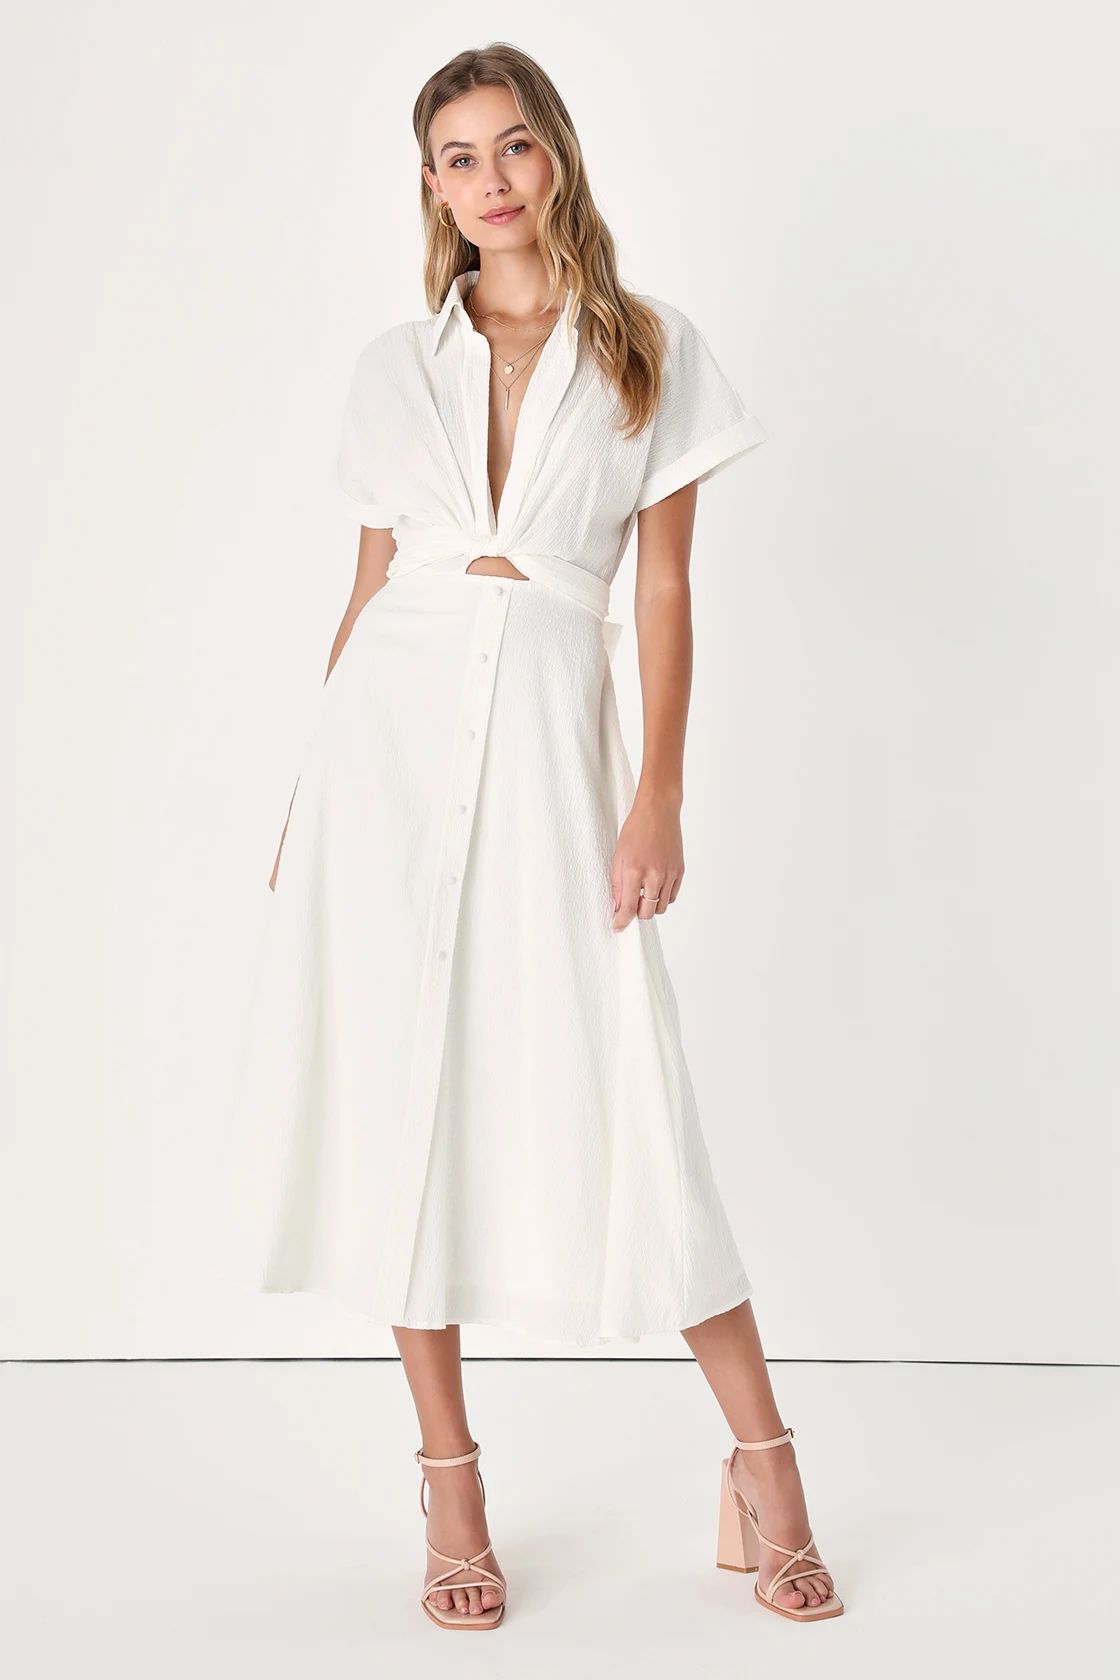 Palermo Perfection White Collared Midi Dress with Pockets | Lulus (US)